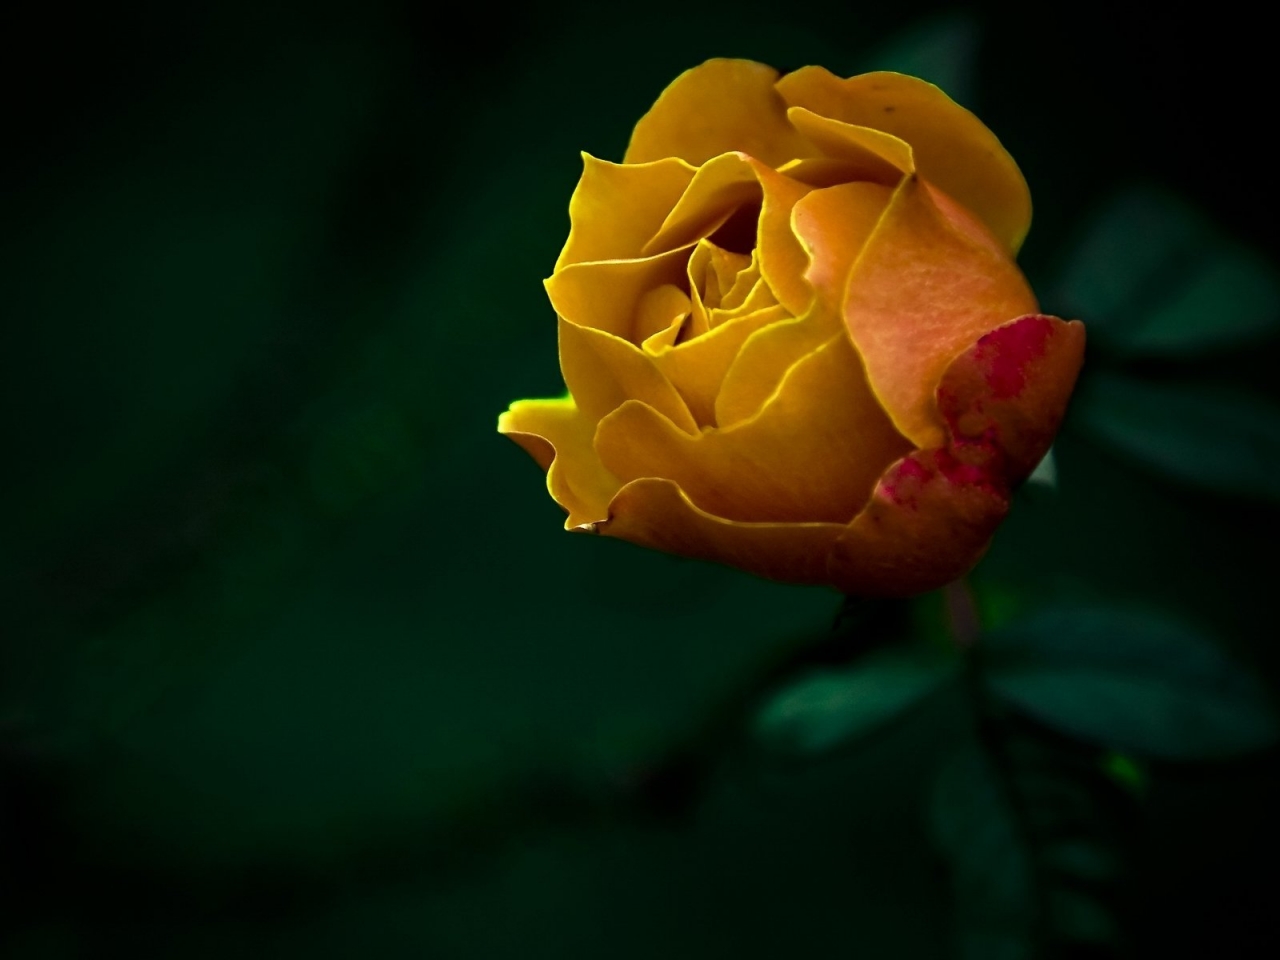 The last Rose for 1280 x 960 resolution